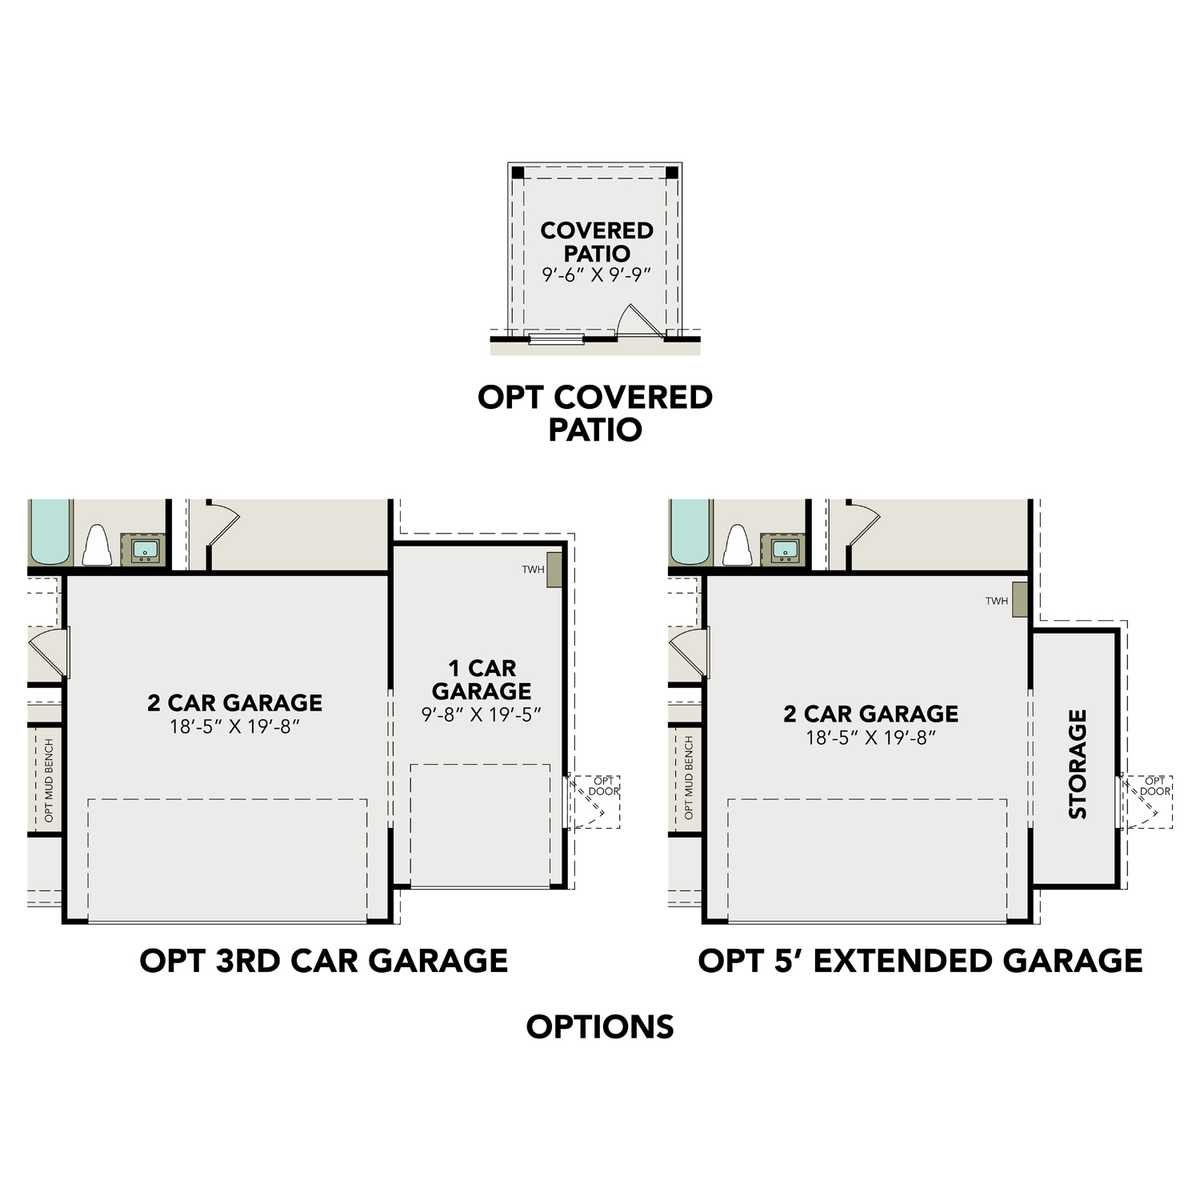 2 - The Frio D buildable floor plan layout in Davidson Homes' Applewhite Meadows community.